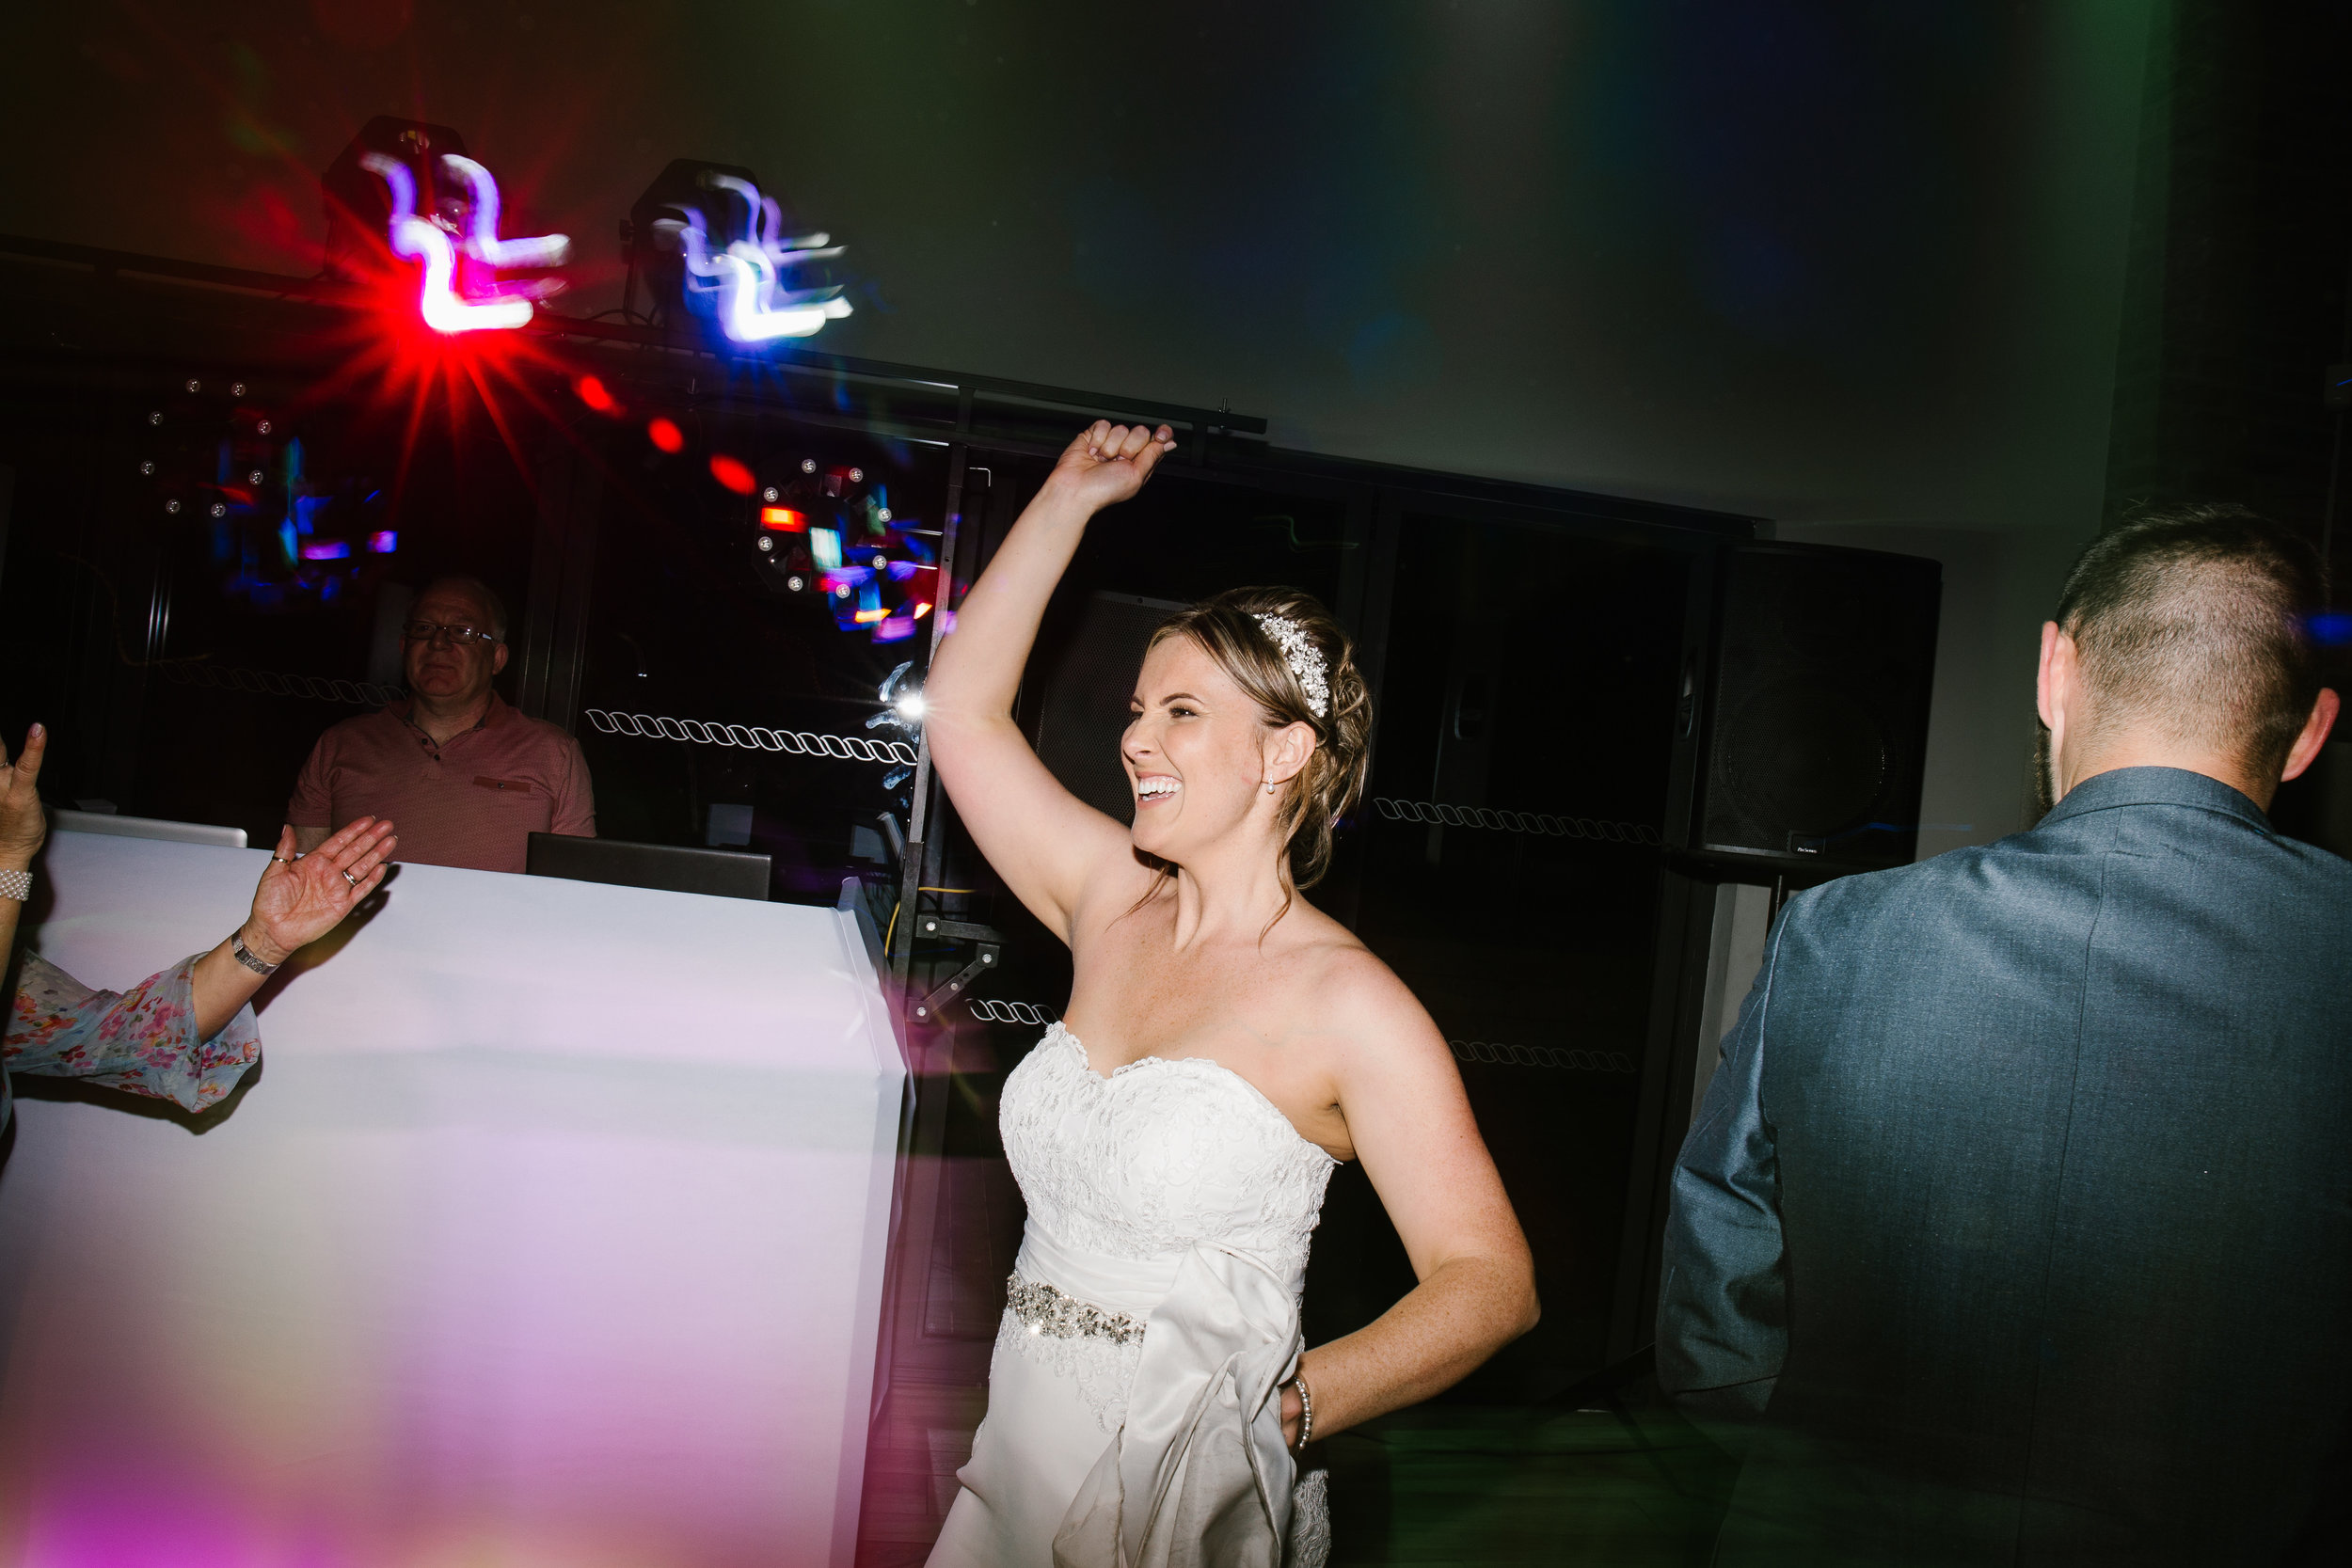 bride dancing to steps on the party of her wedding night